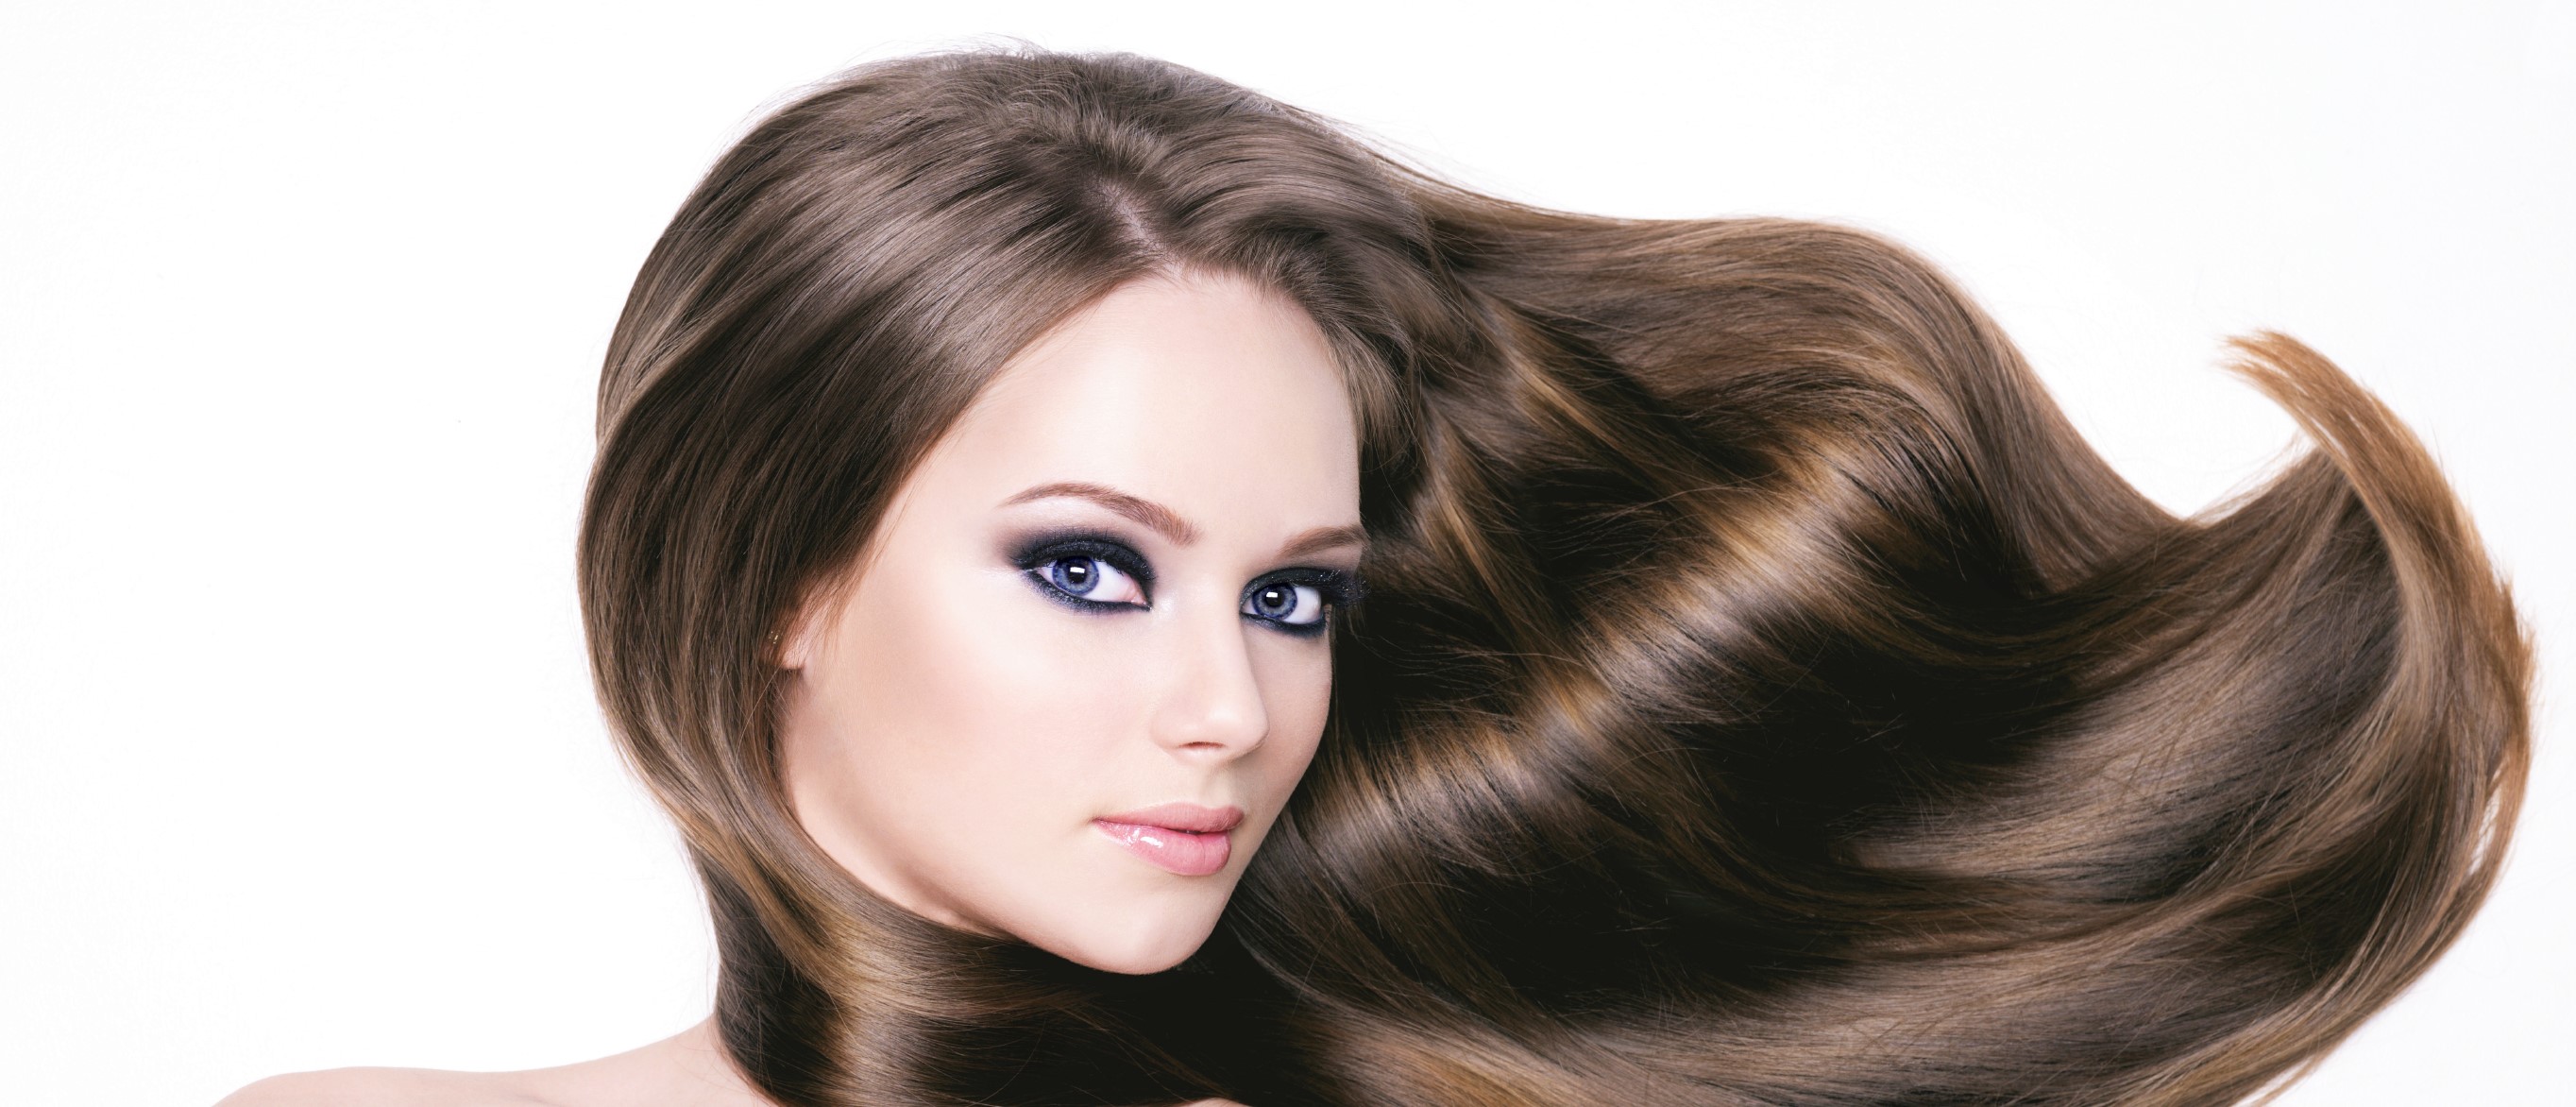 Portrait of a beautiful young woman with long hair and brighr black eye make-up- horizontal